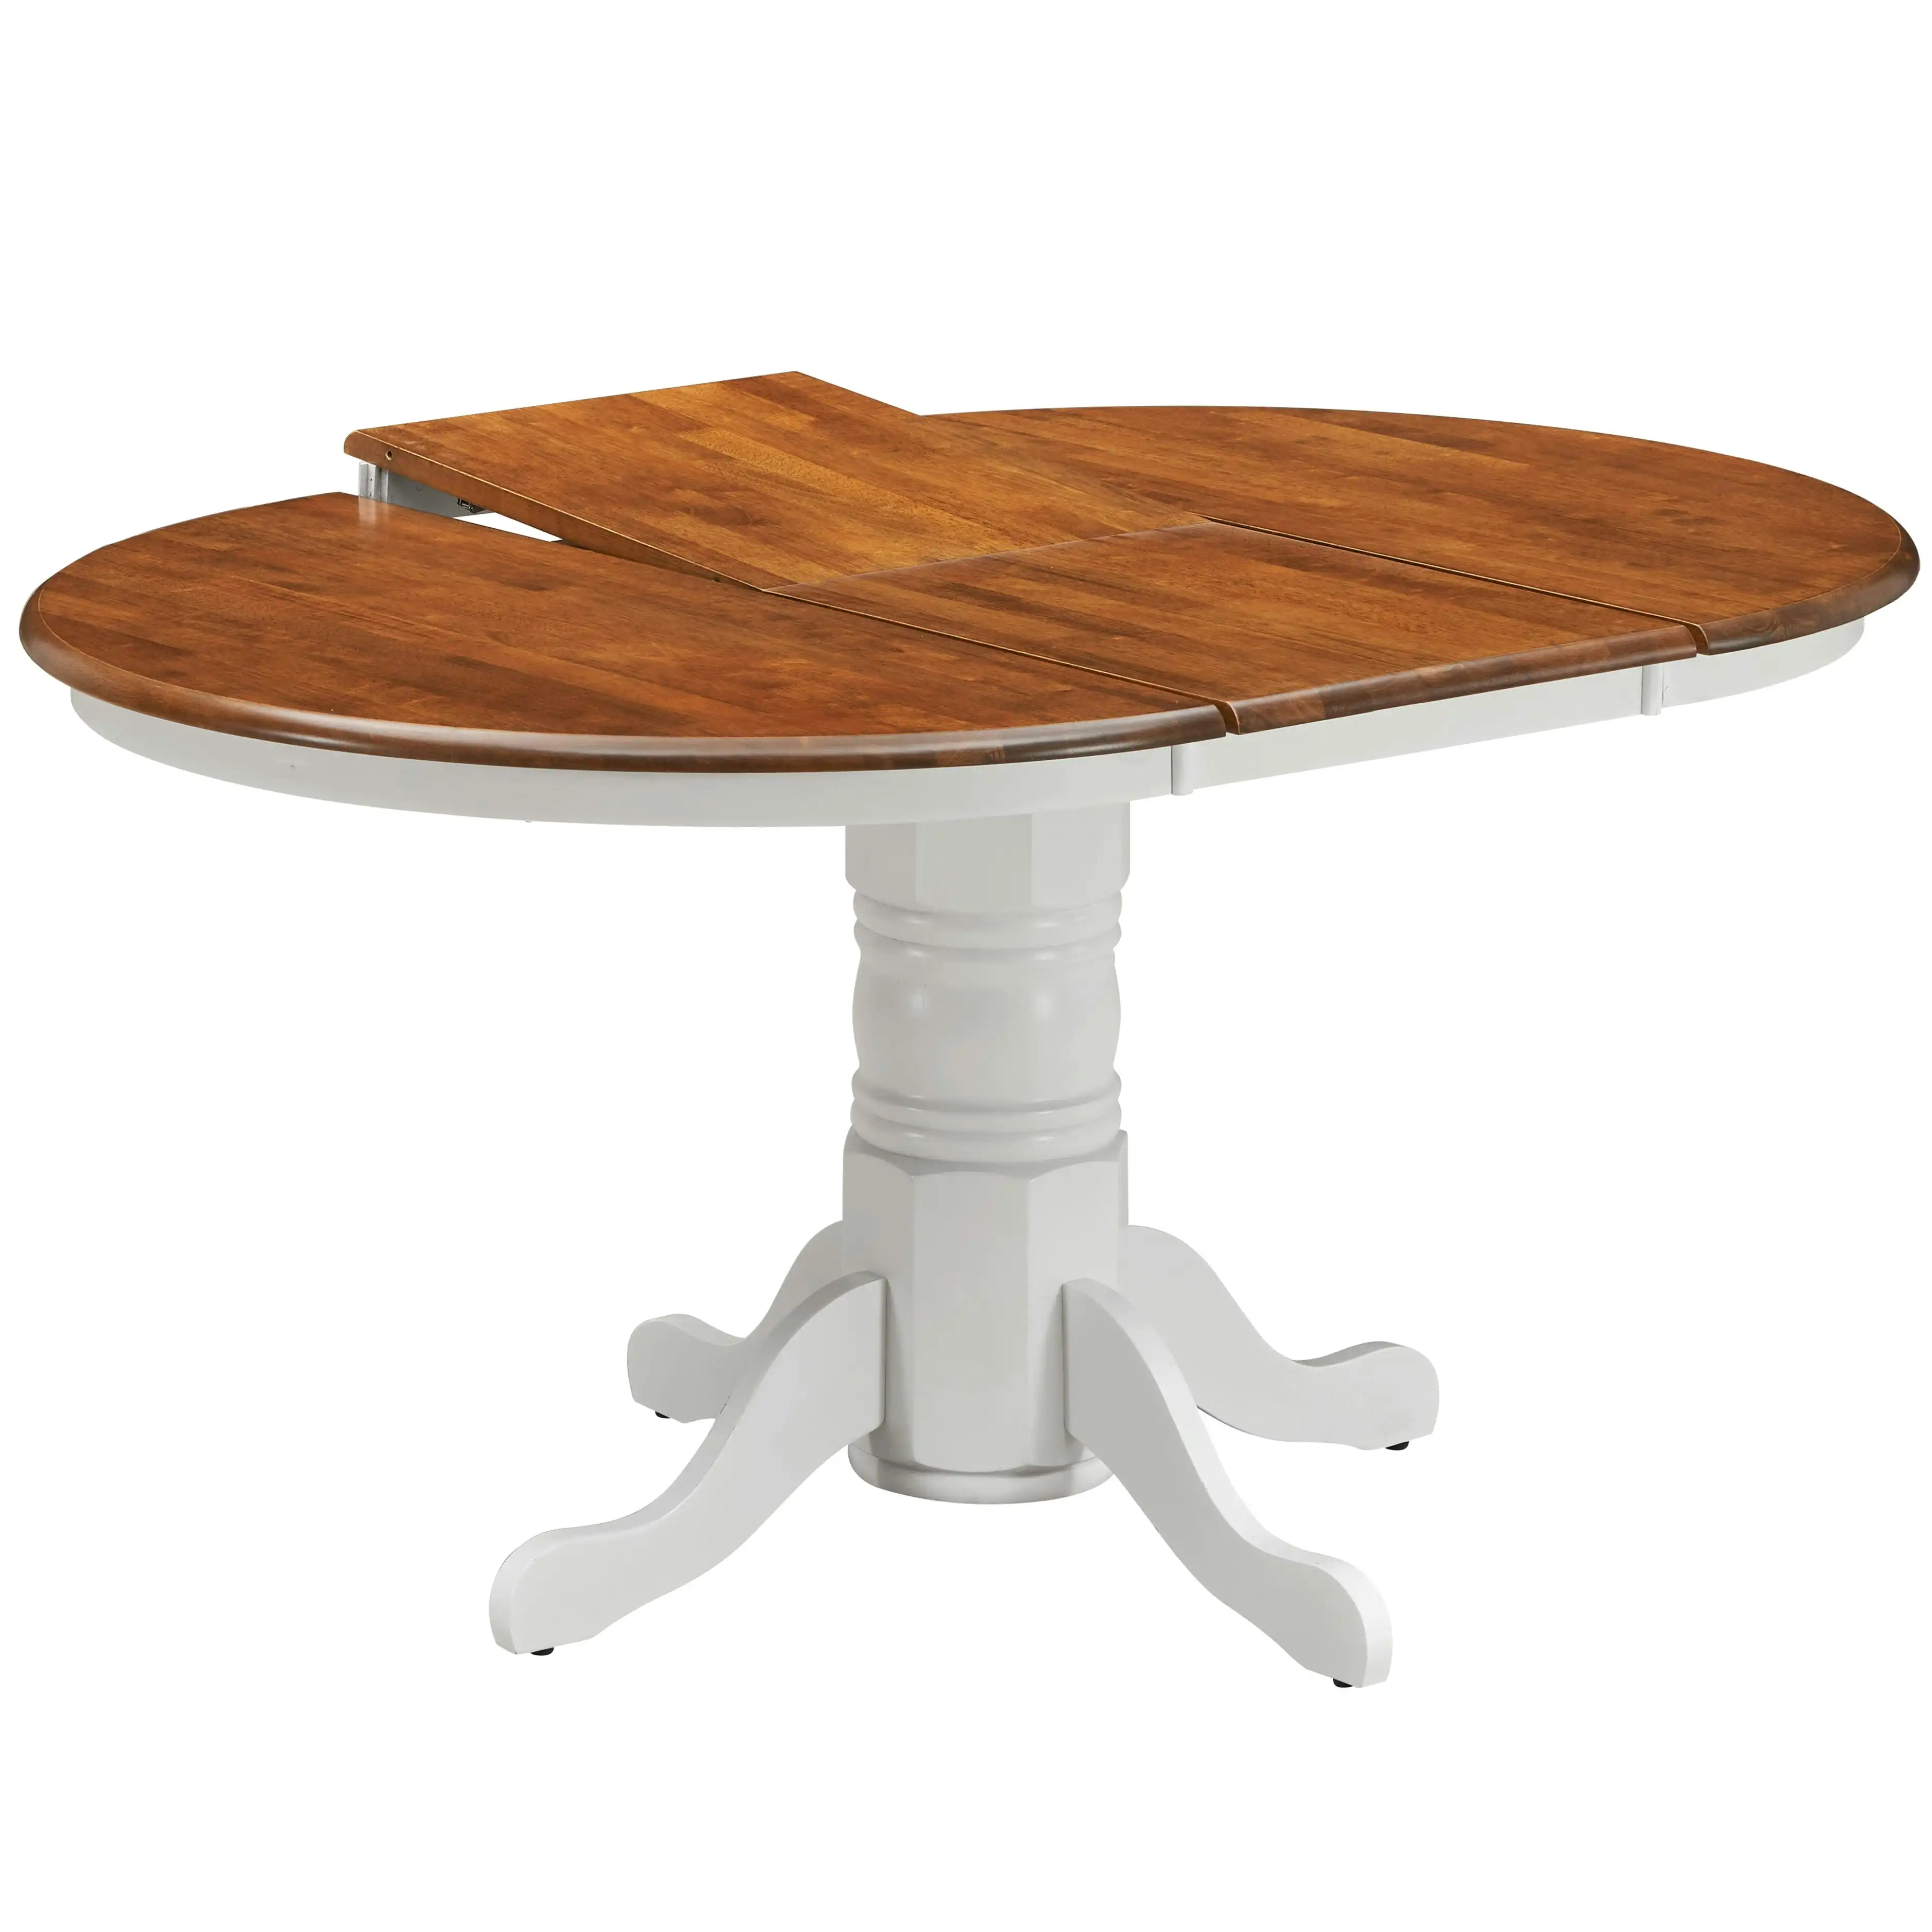 Lupin 106-150cm Extendable Round Dining Table